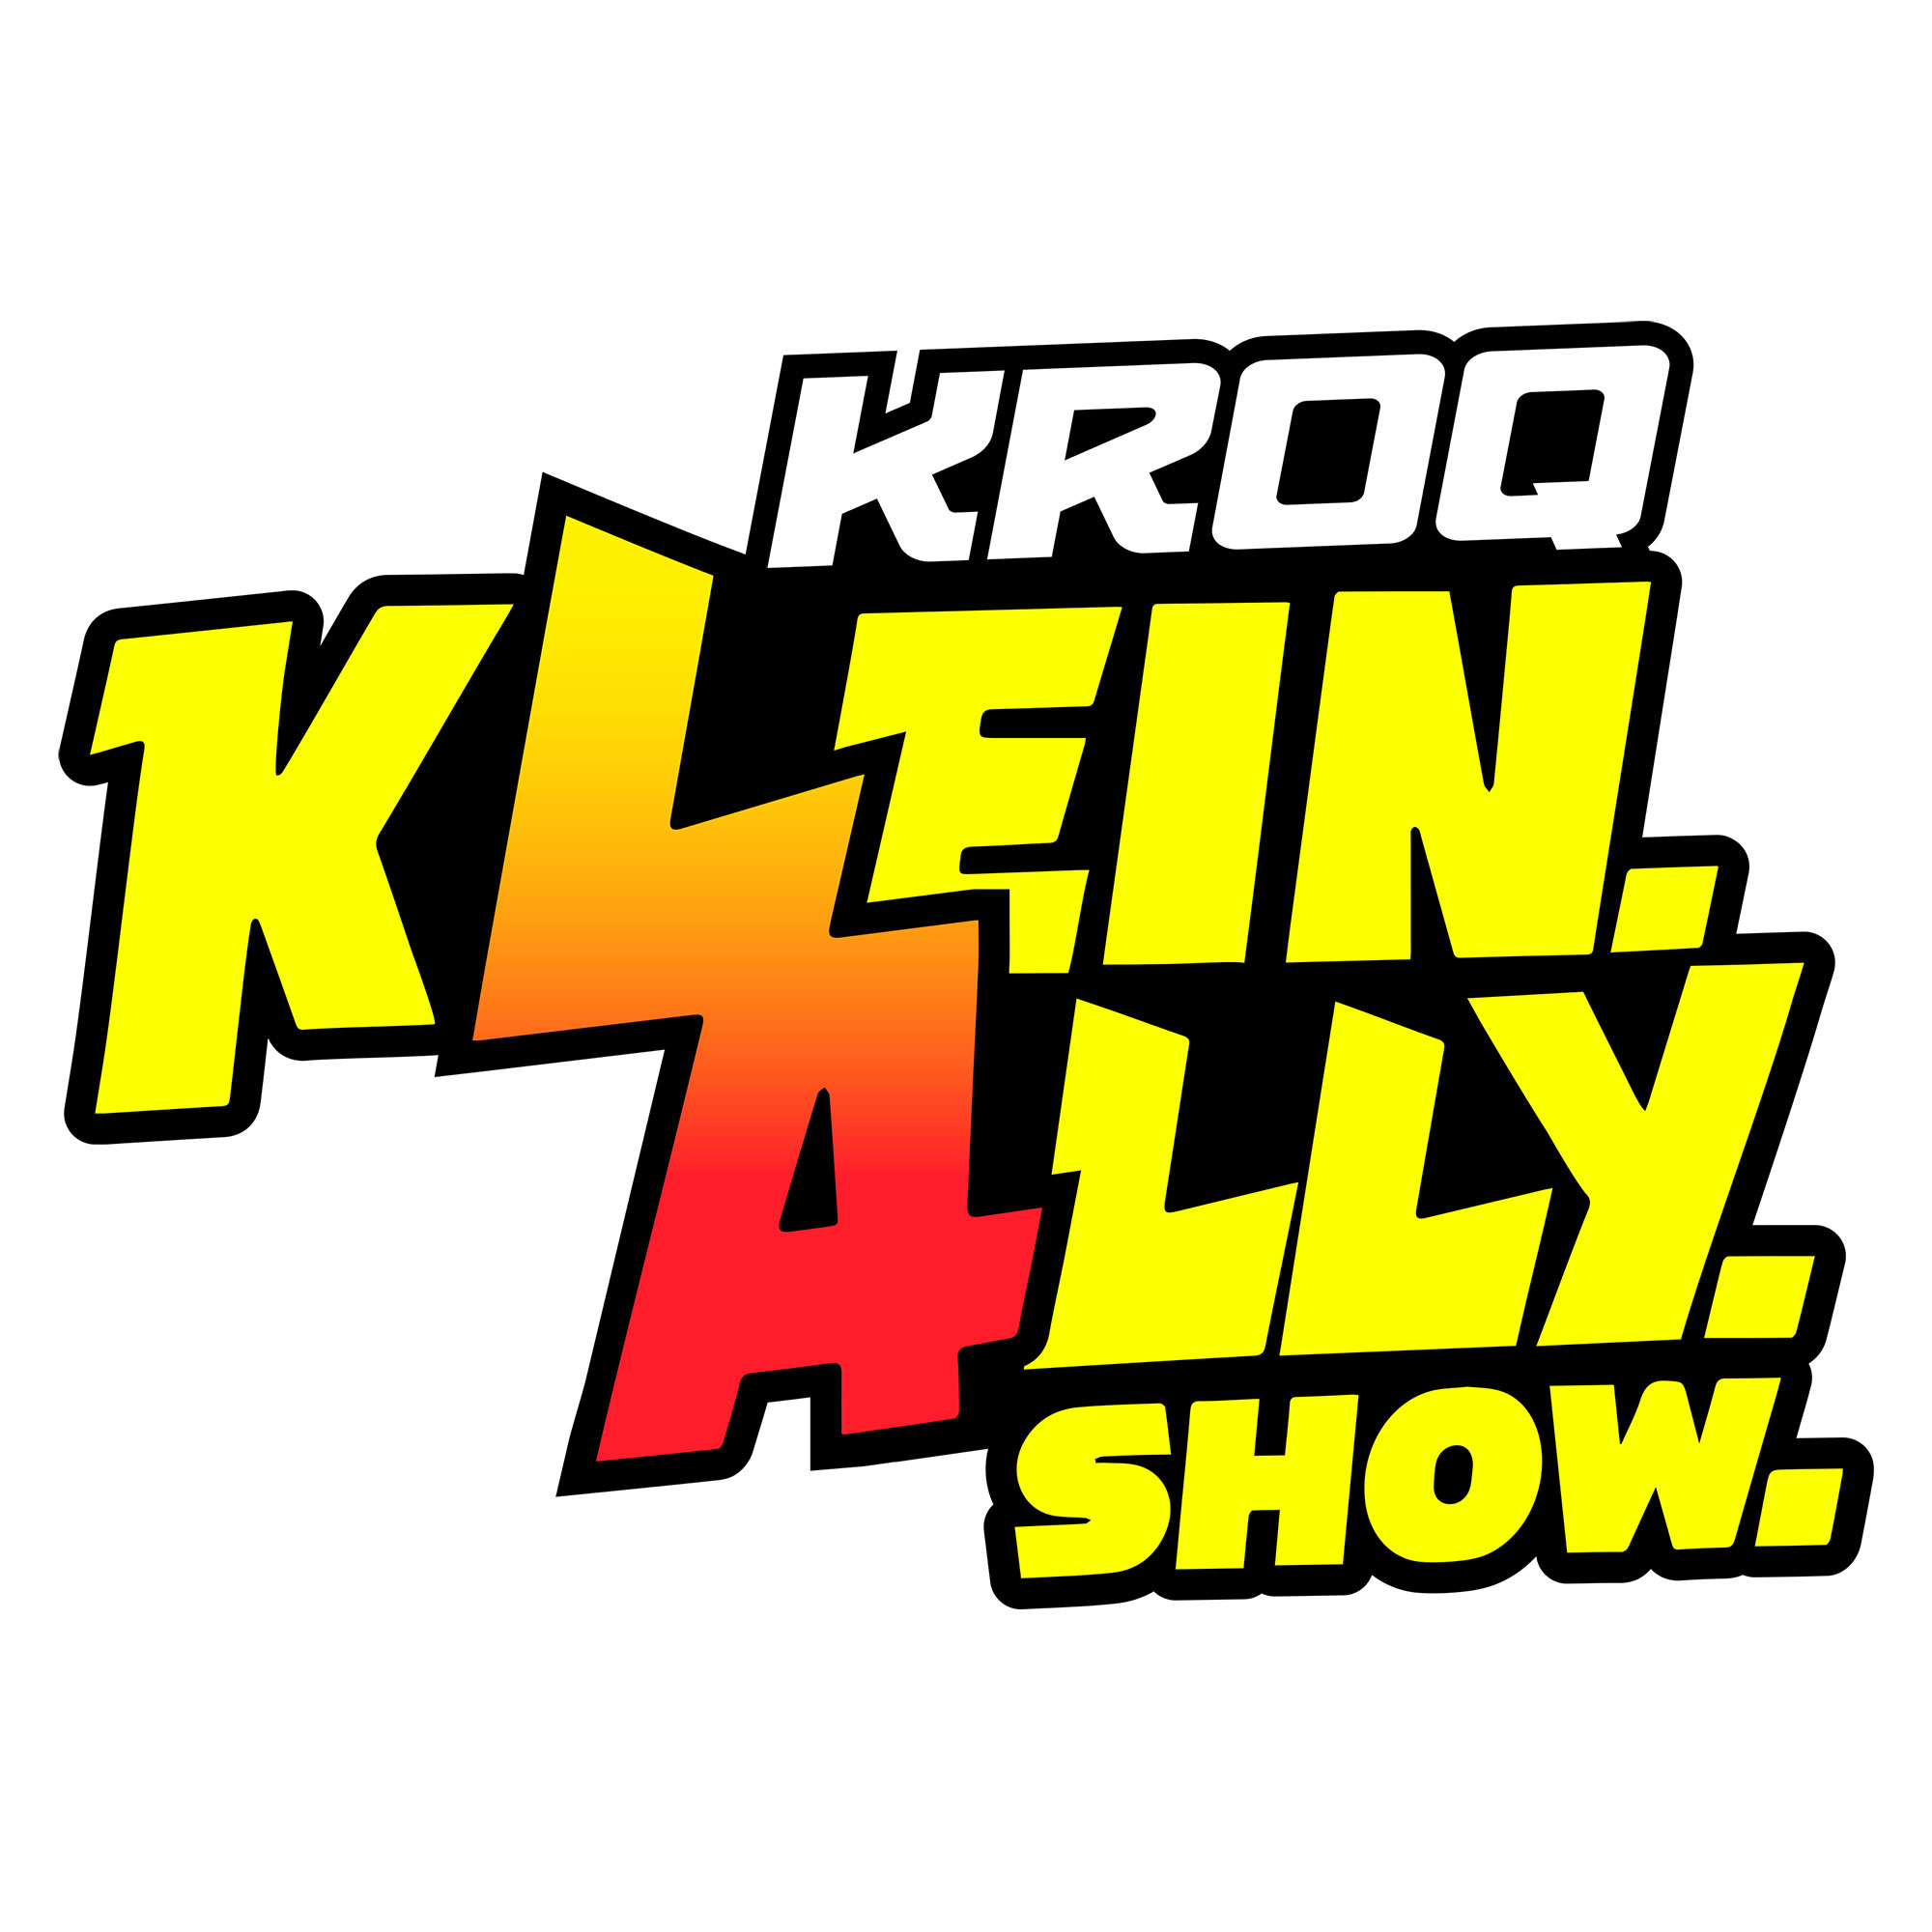 Klein/Ally Show: The Podcast